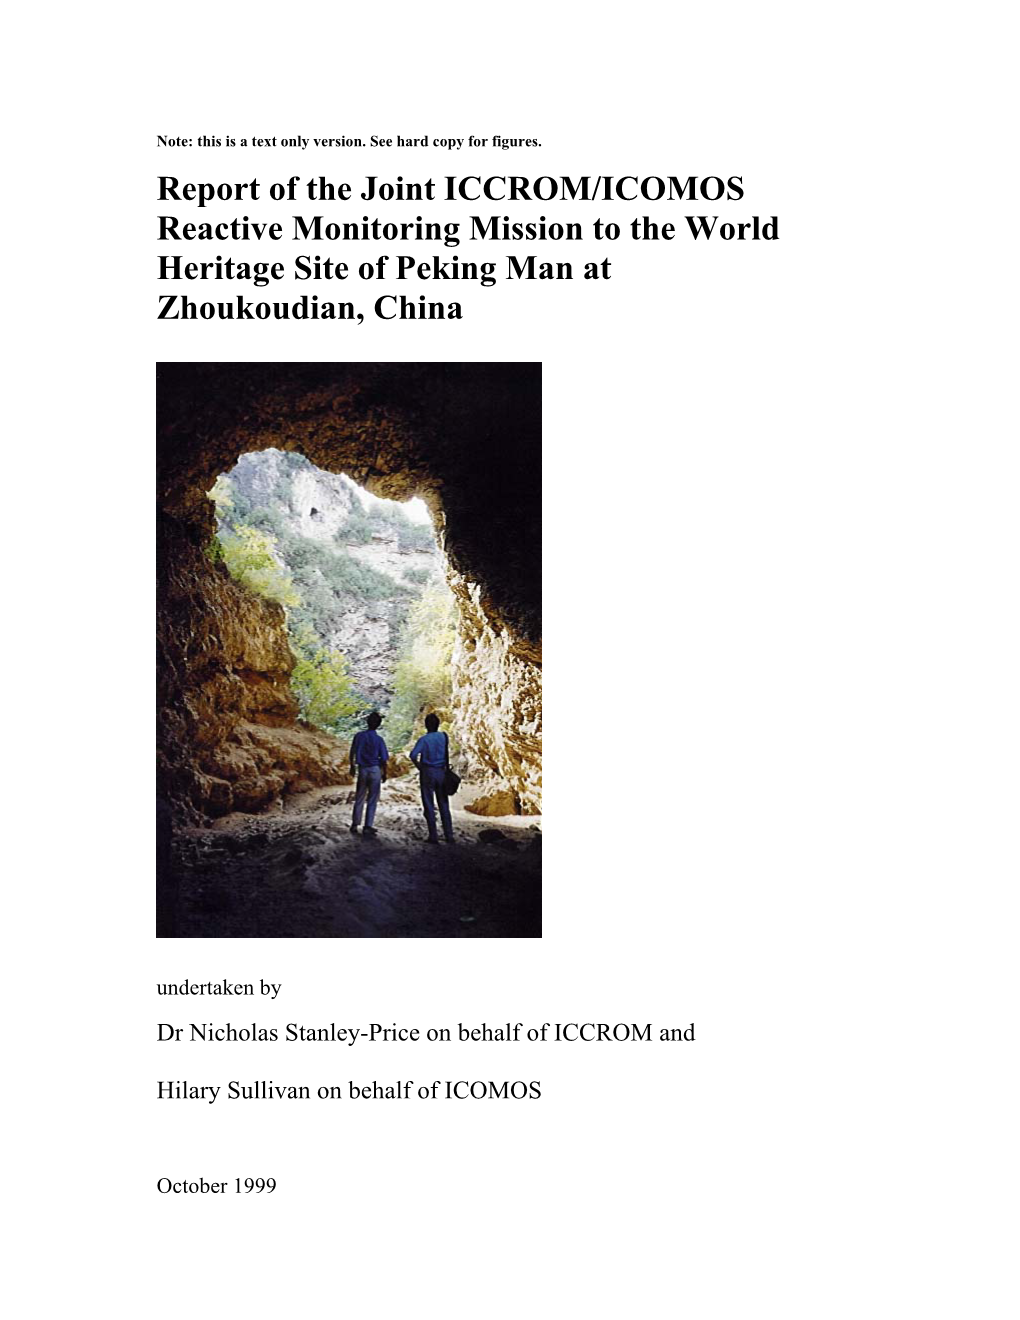 Report of the Joint ICCROM/ICOMOS Reactive Monitoring Mission to Teh